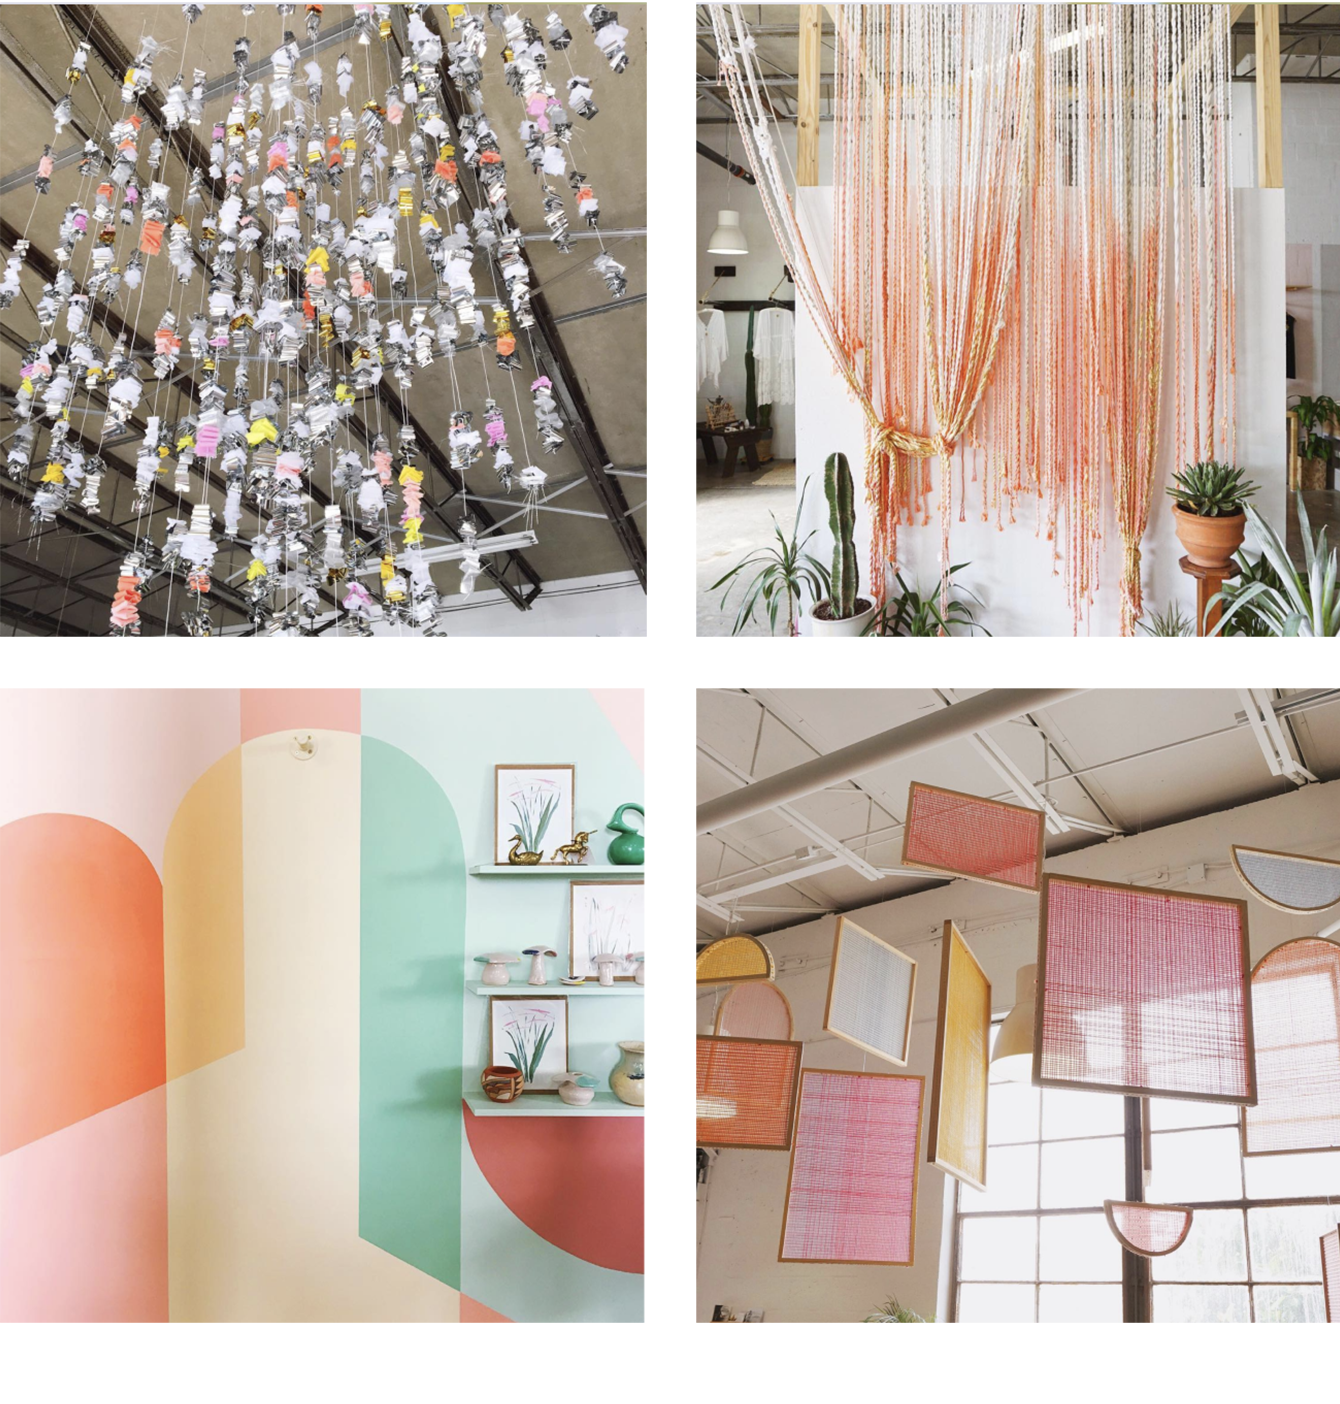 Installations created in collaboration with Hayley Sheldon include a shiny silver & warm pastel colored ceiling hanging, a coral & gold rope backdrop, a colorful mural design with shelving and hook to show retail product, and hanging woven frames.